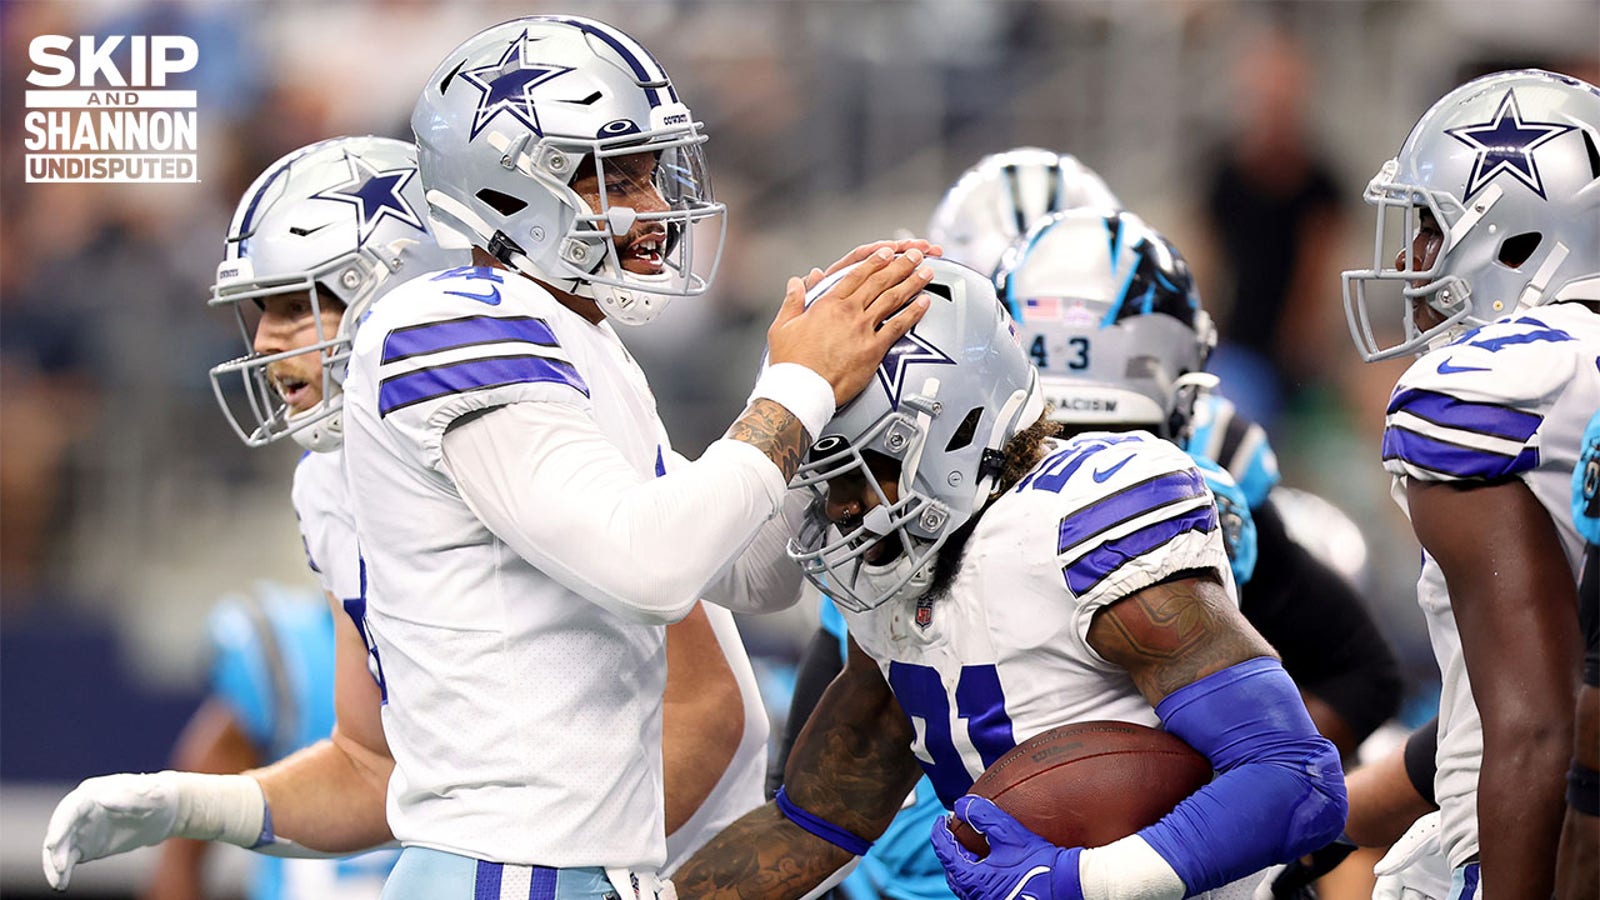 Skip Bayless explains how his Cowboys impressed him against the league's top-ranked defense in Week 5, and why he thinks this Dallas team is finally for real.